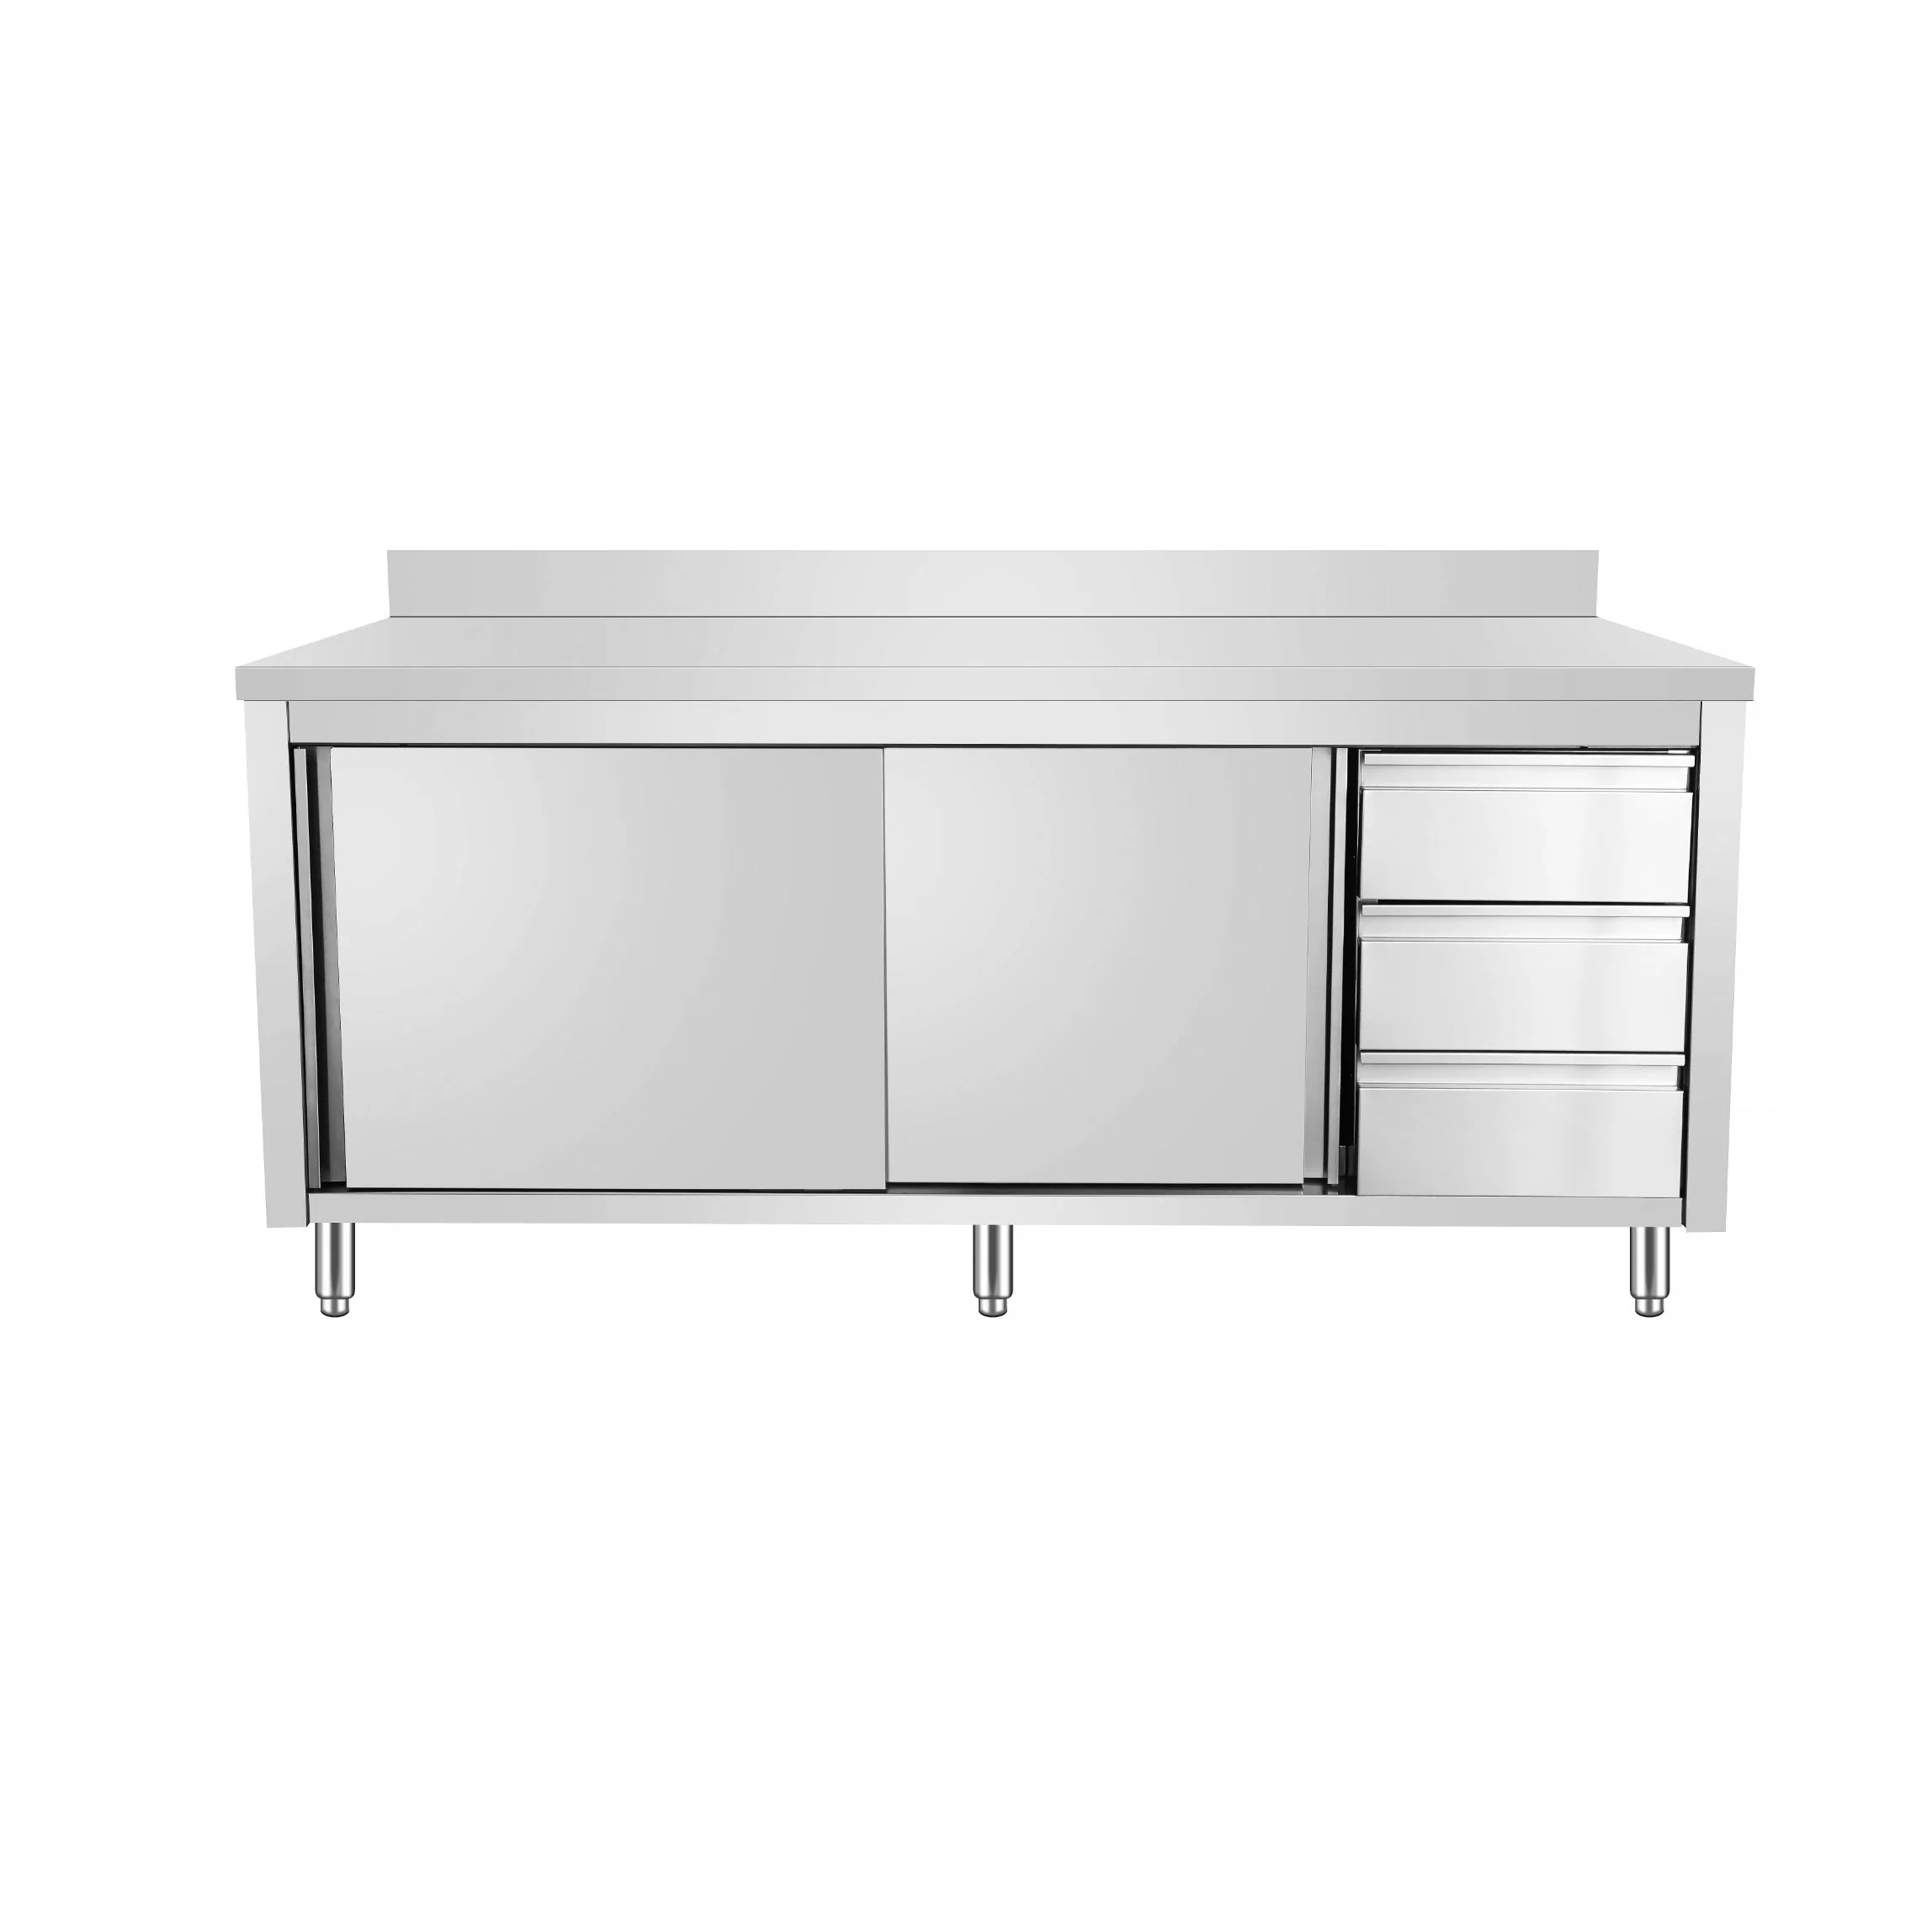 High Quality Commercial Stainless Steel Work Table Kitchenware Kitchen Workbench